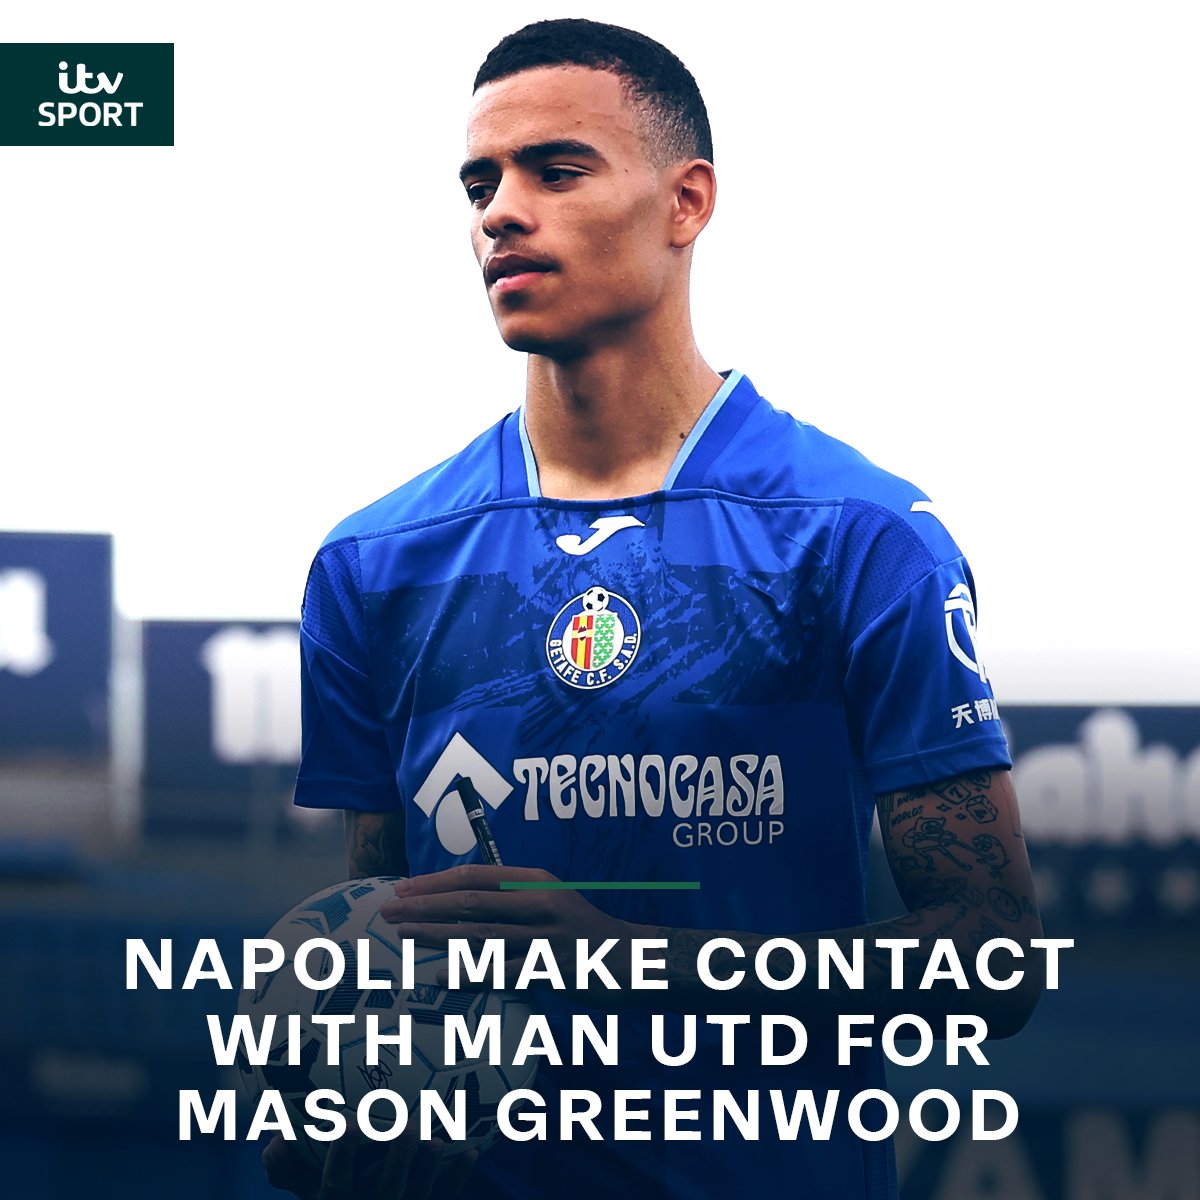 According to reports, Napoli have made contact with Man Utd over signing Mason Greenwood.